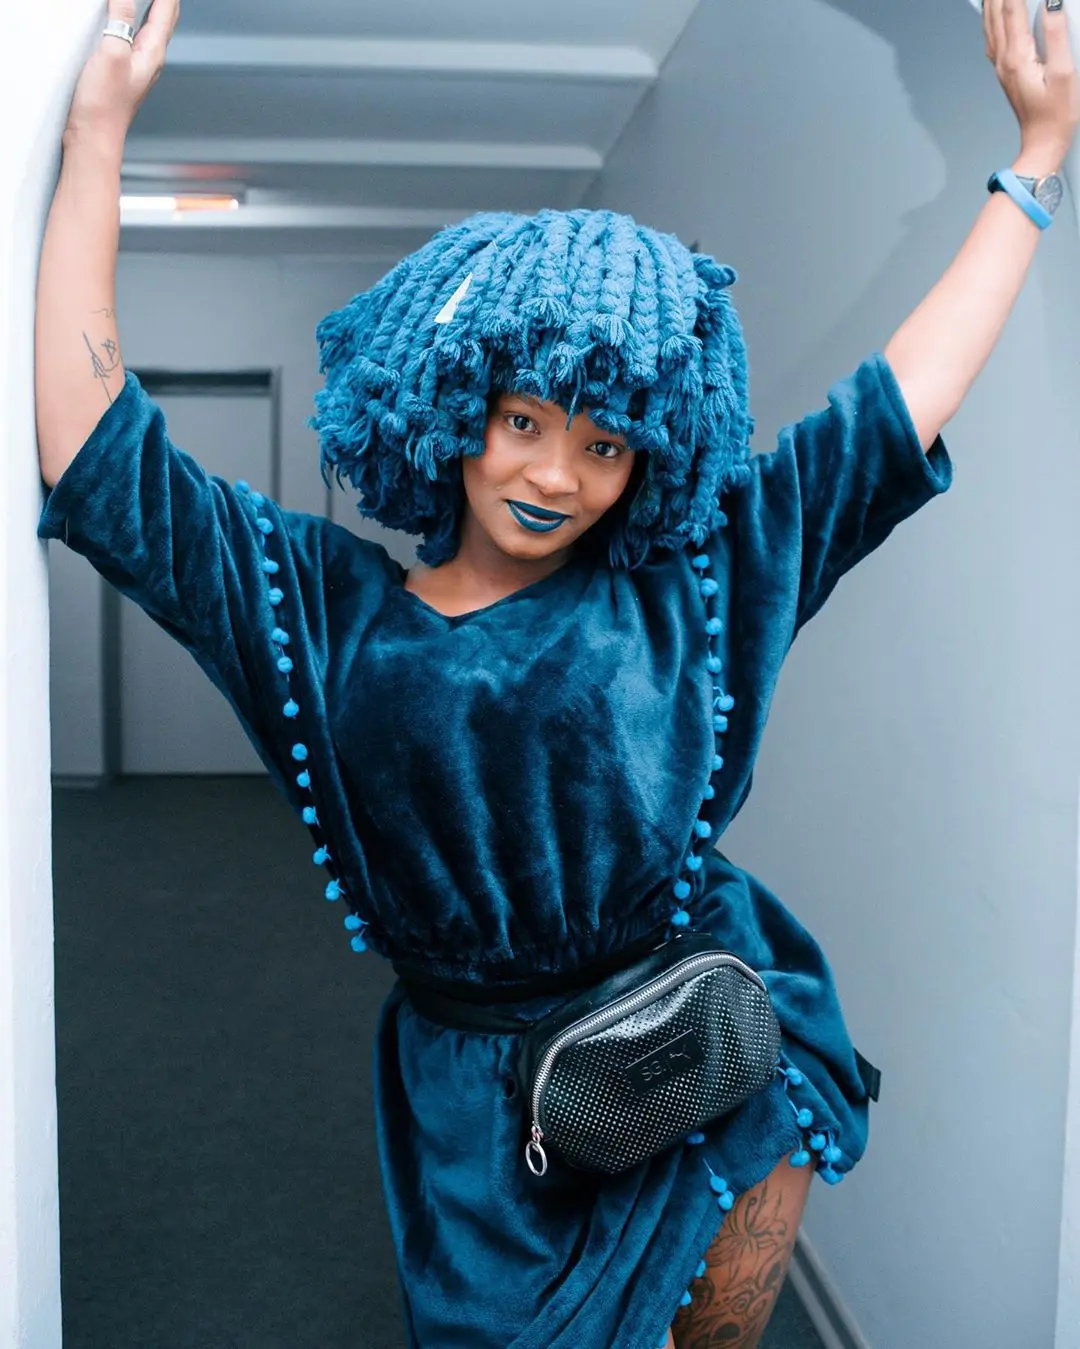 Moonchild Sanelly takes a break from social media due to mental health